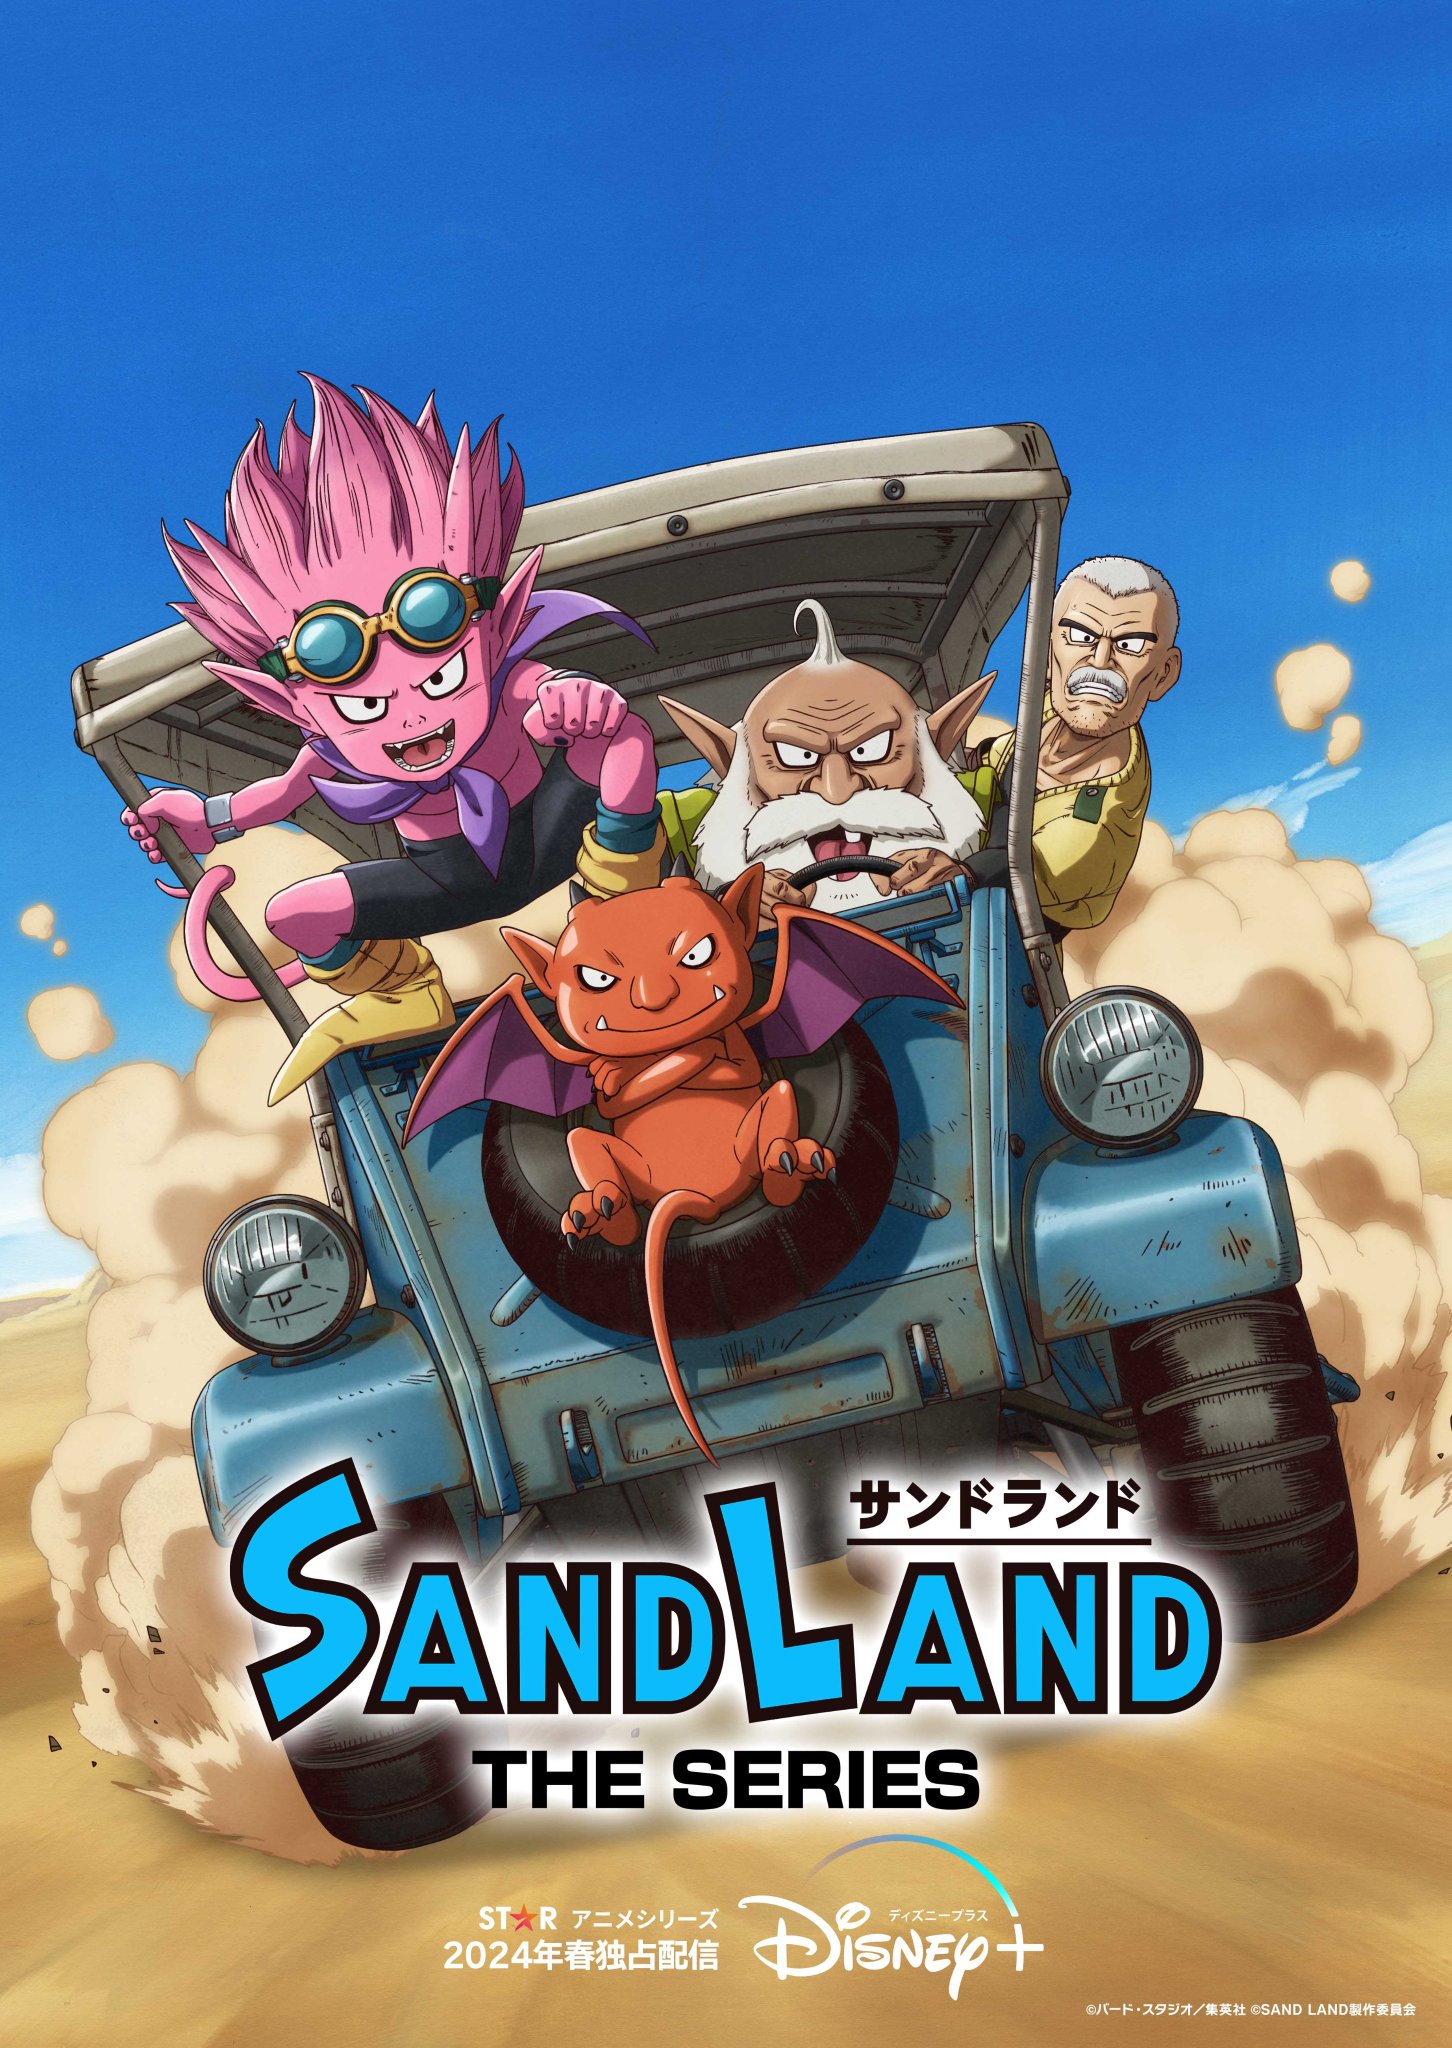 Knoebel on X: Akira Toriyama's 'Sand Land' is getting an anime and gaming  adaption in 2024. Tha game is coming to Xbox Series, PS5 and PC. Today they  announced that the Anime